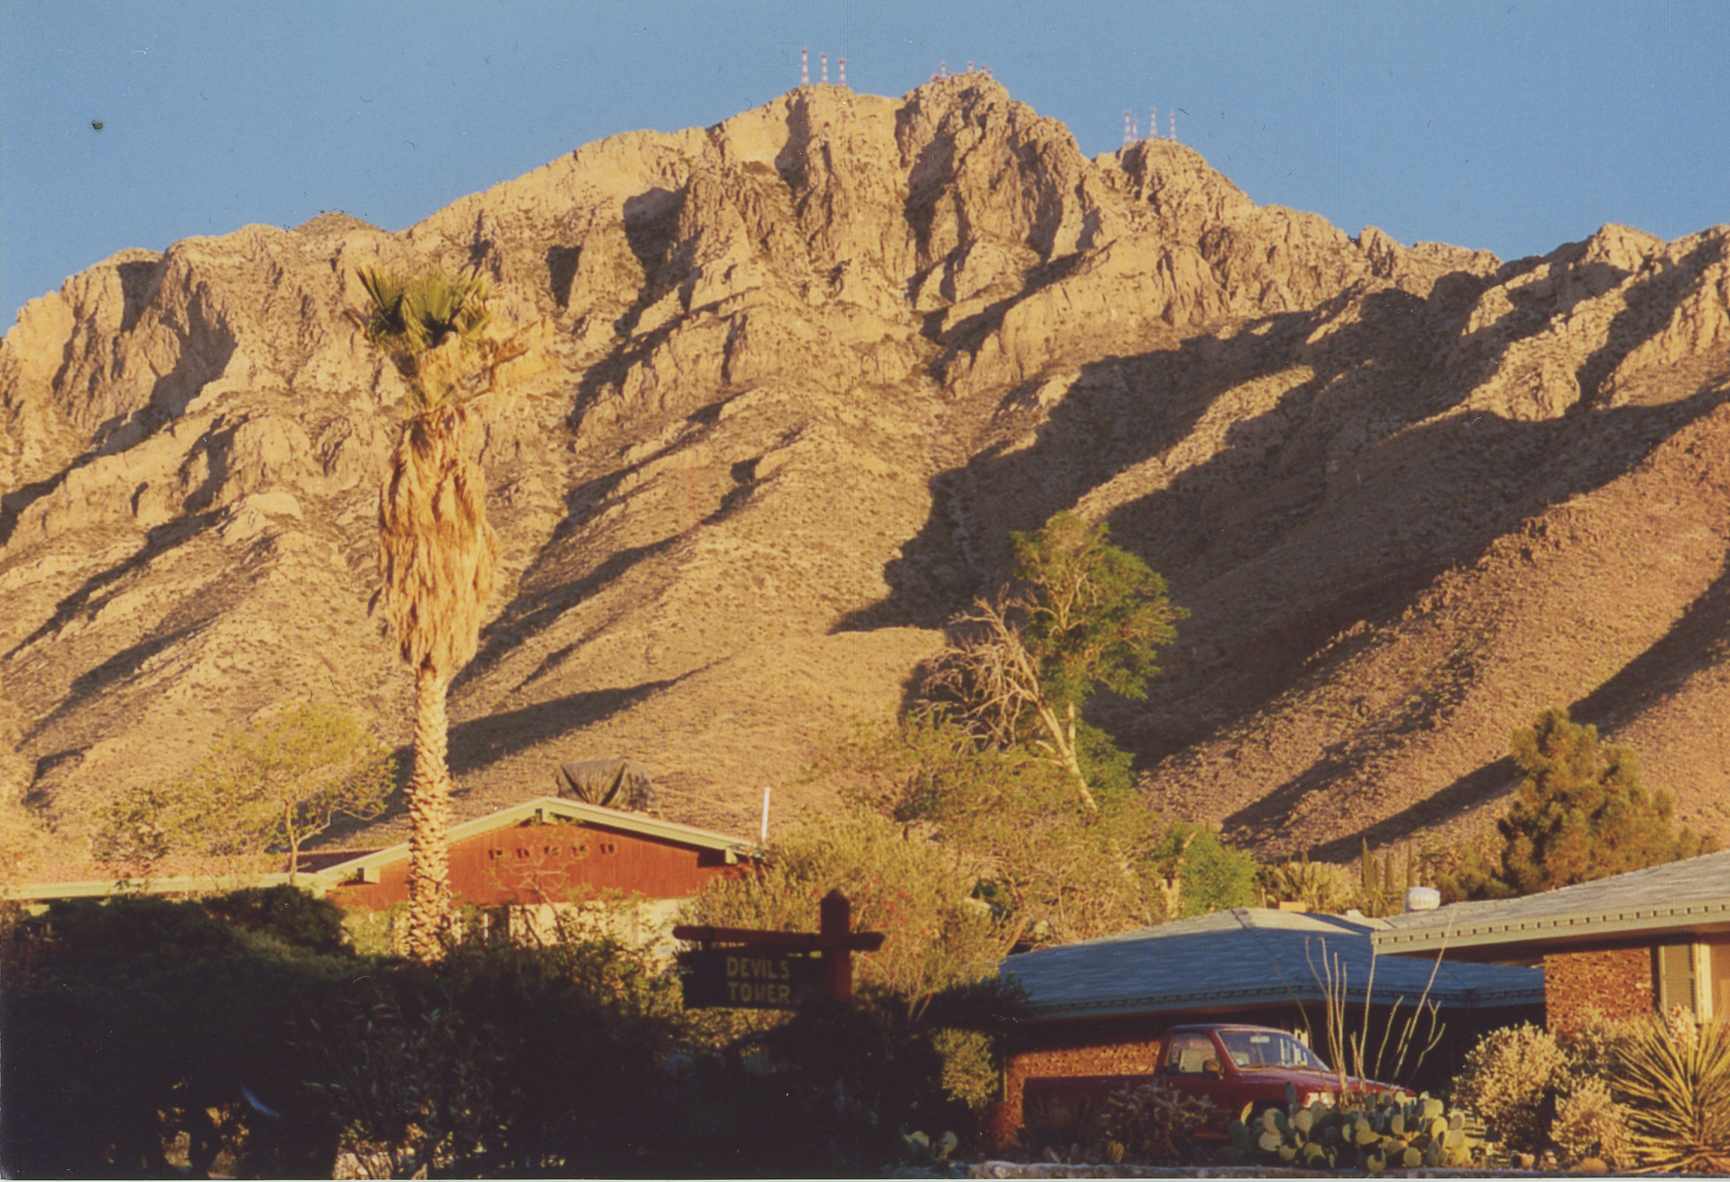 Growing up on the sunrise side of the mountain. View from our front yard in Mountain Park, El Paso, Texas   
 Photo © 2006 Ann James Massey